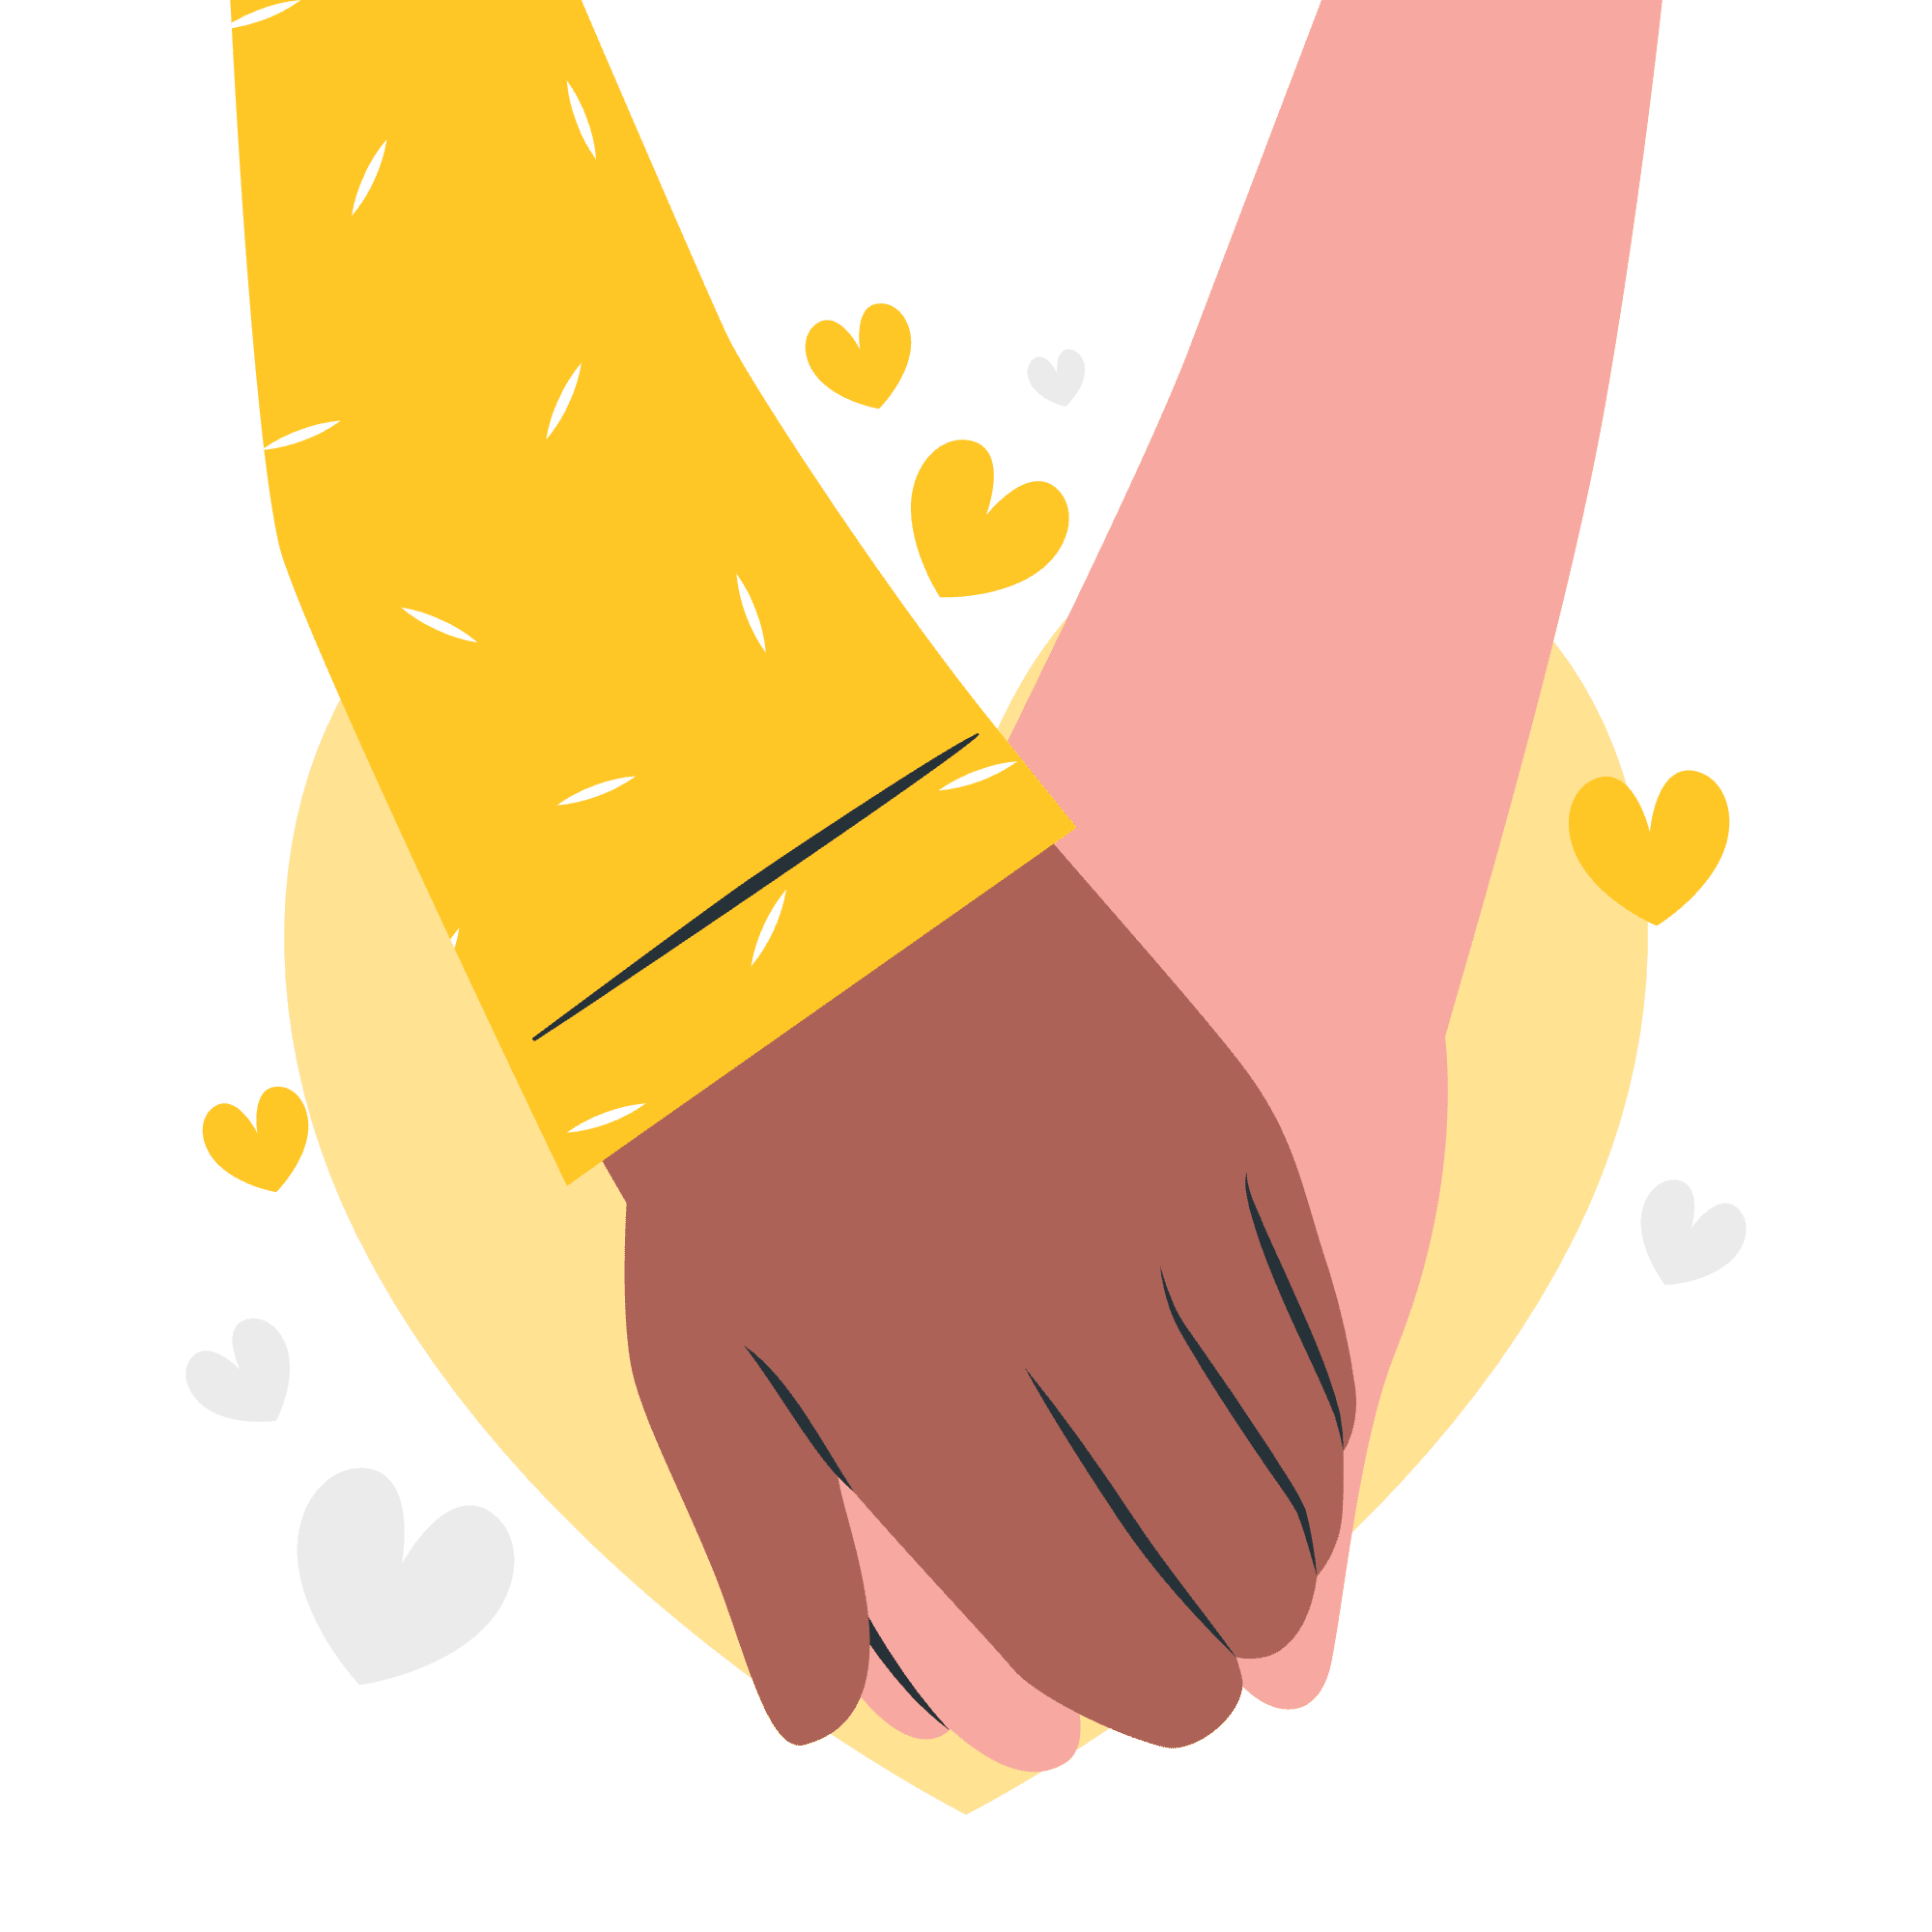 Holding hands-cuate.png